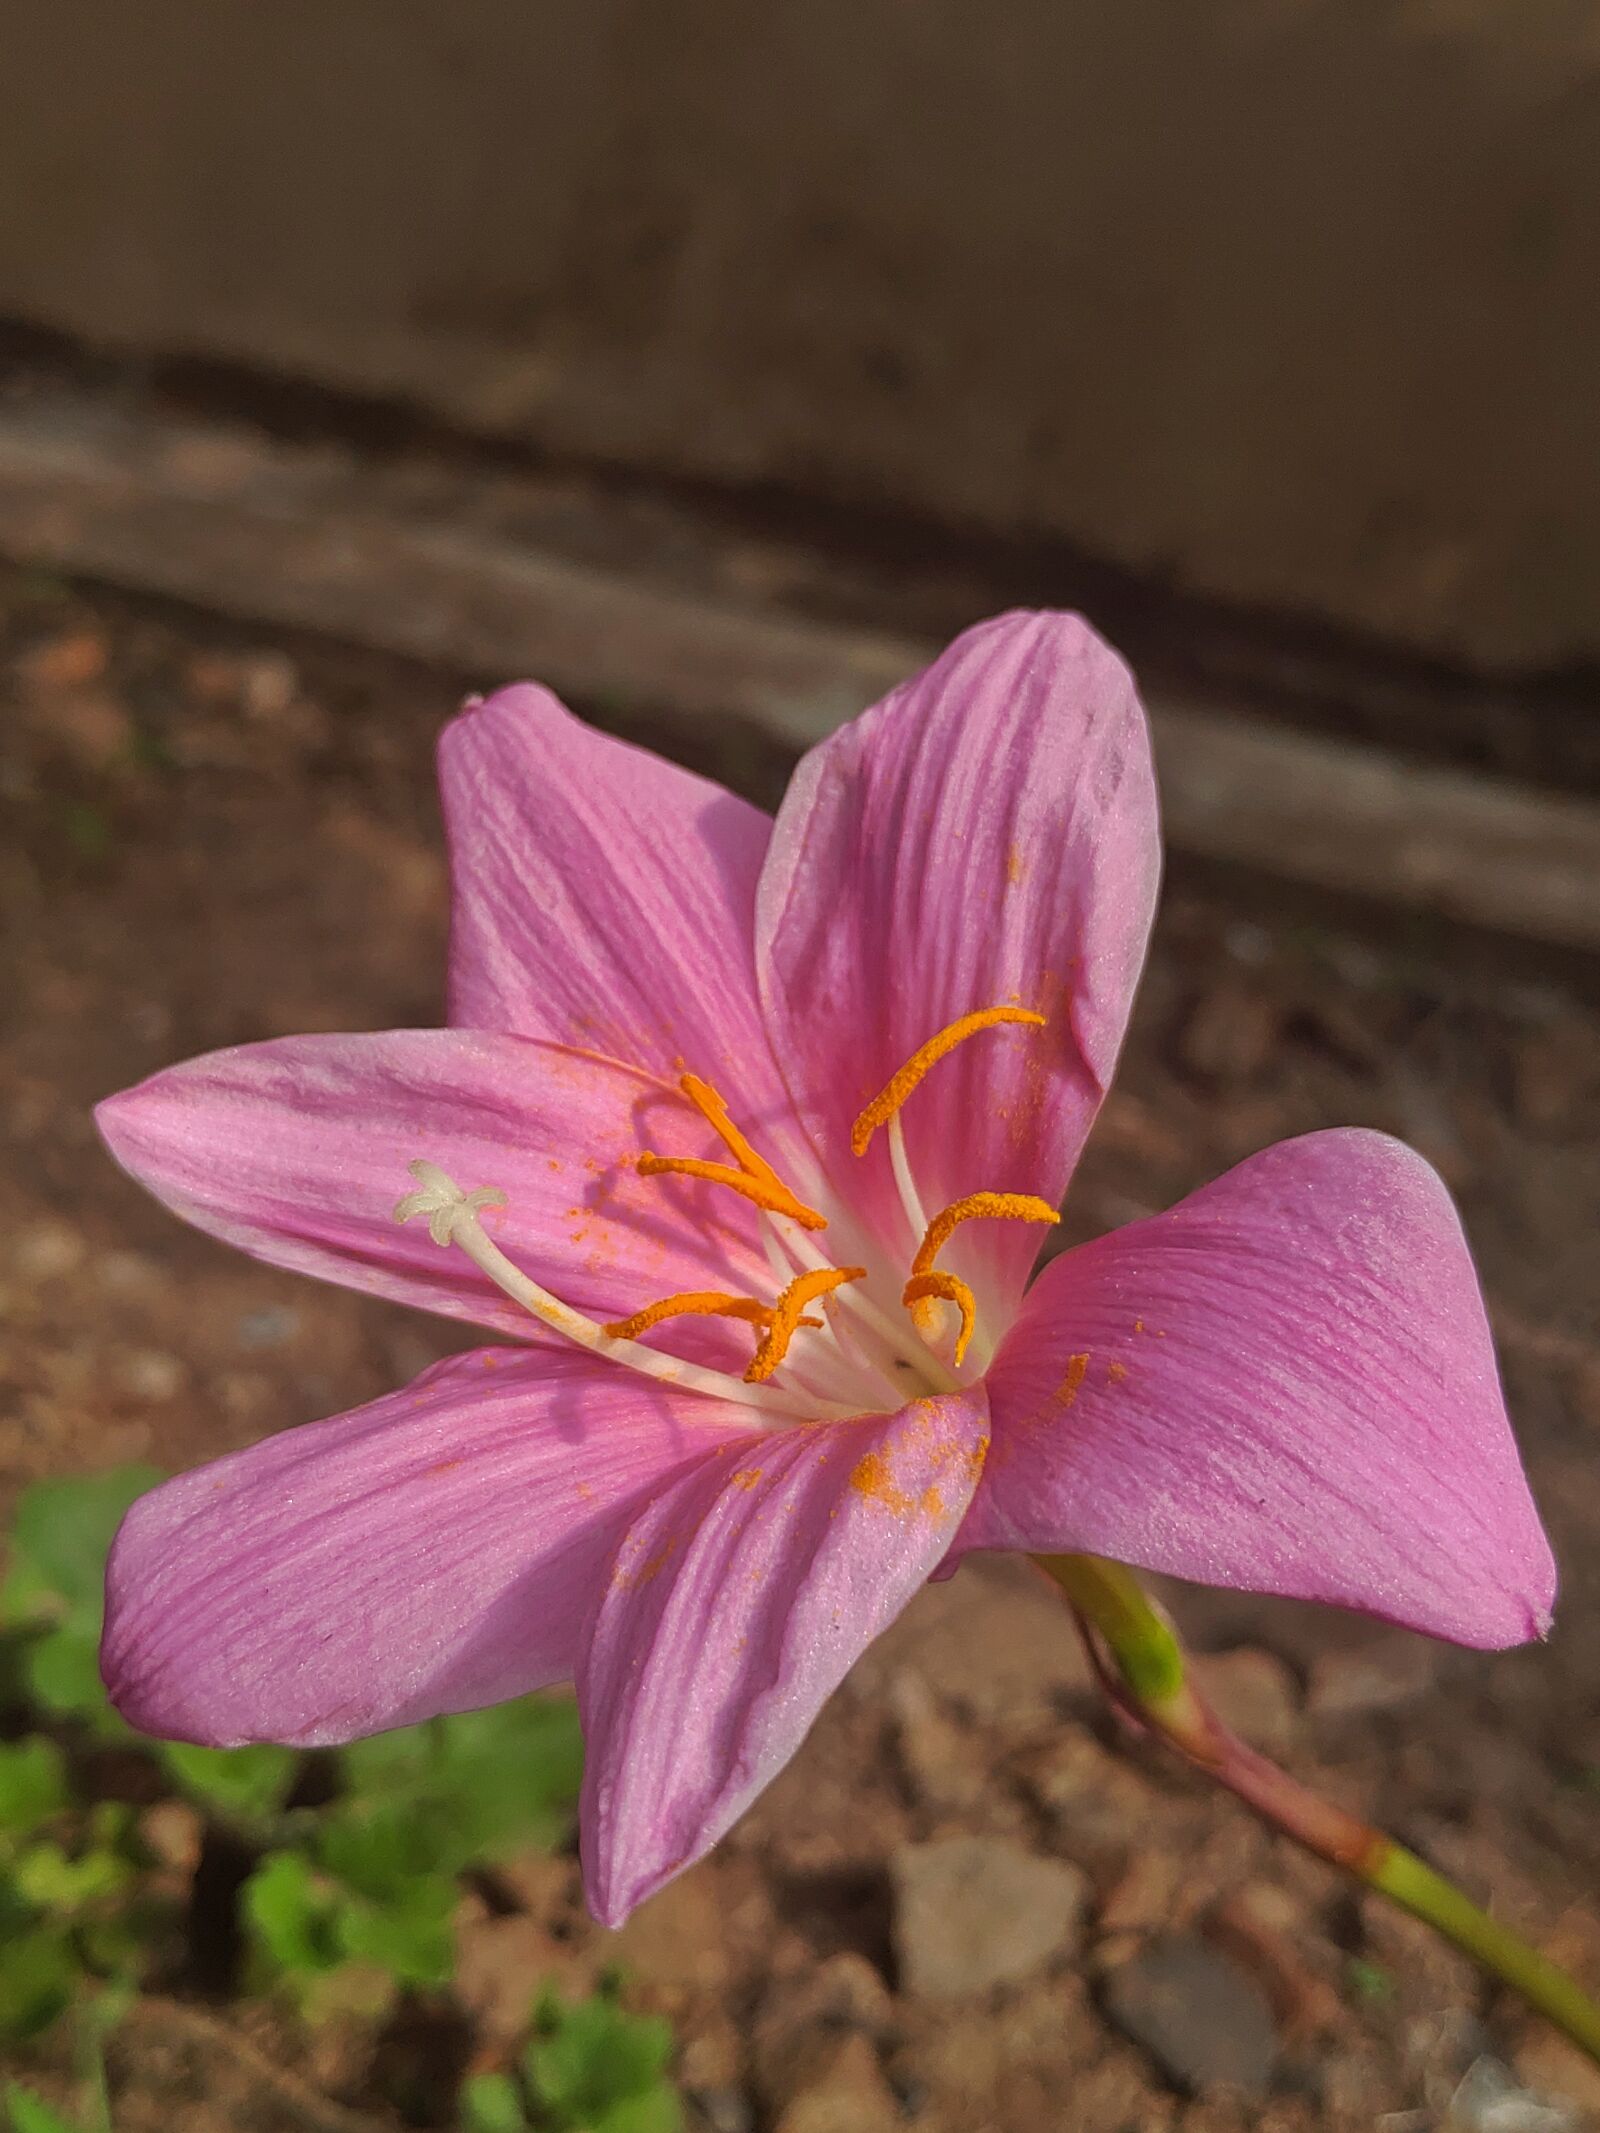 ASUS ZenFone 5Z (ZS620KL) (WW) / 5Z (ZS621KL) (IN) sample photo. Flower, flower images, nature photography